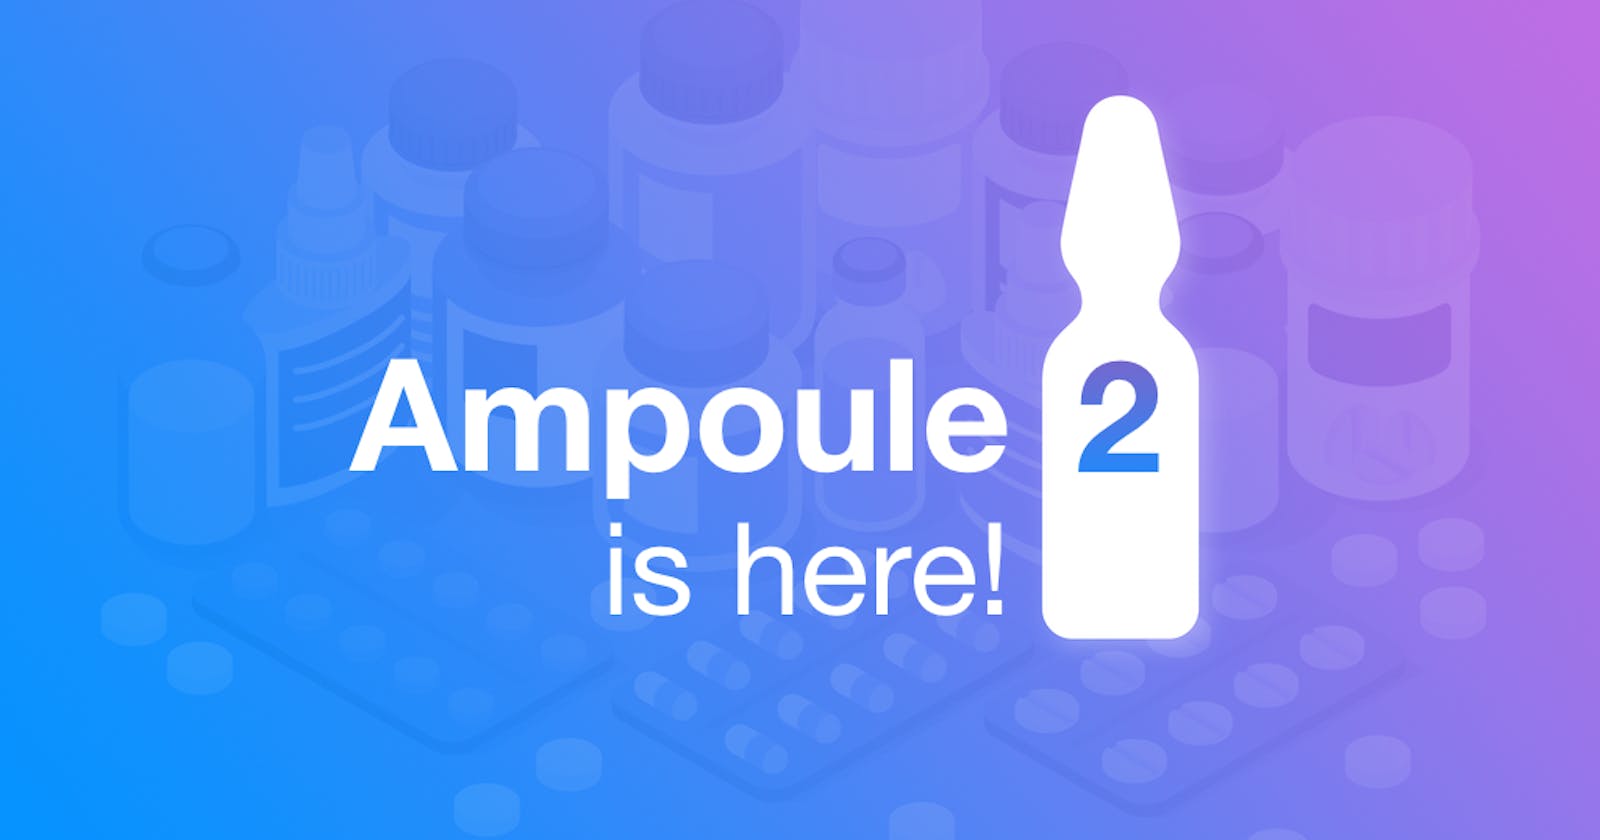 Welcome to Ampoule 2